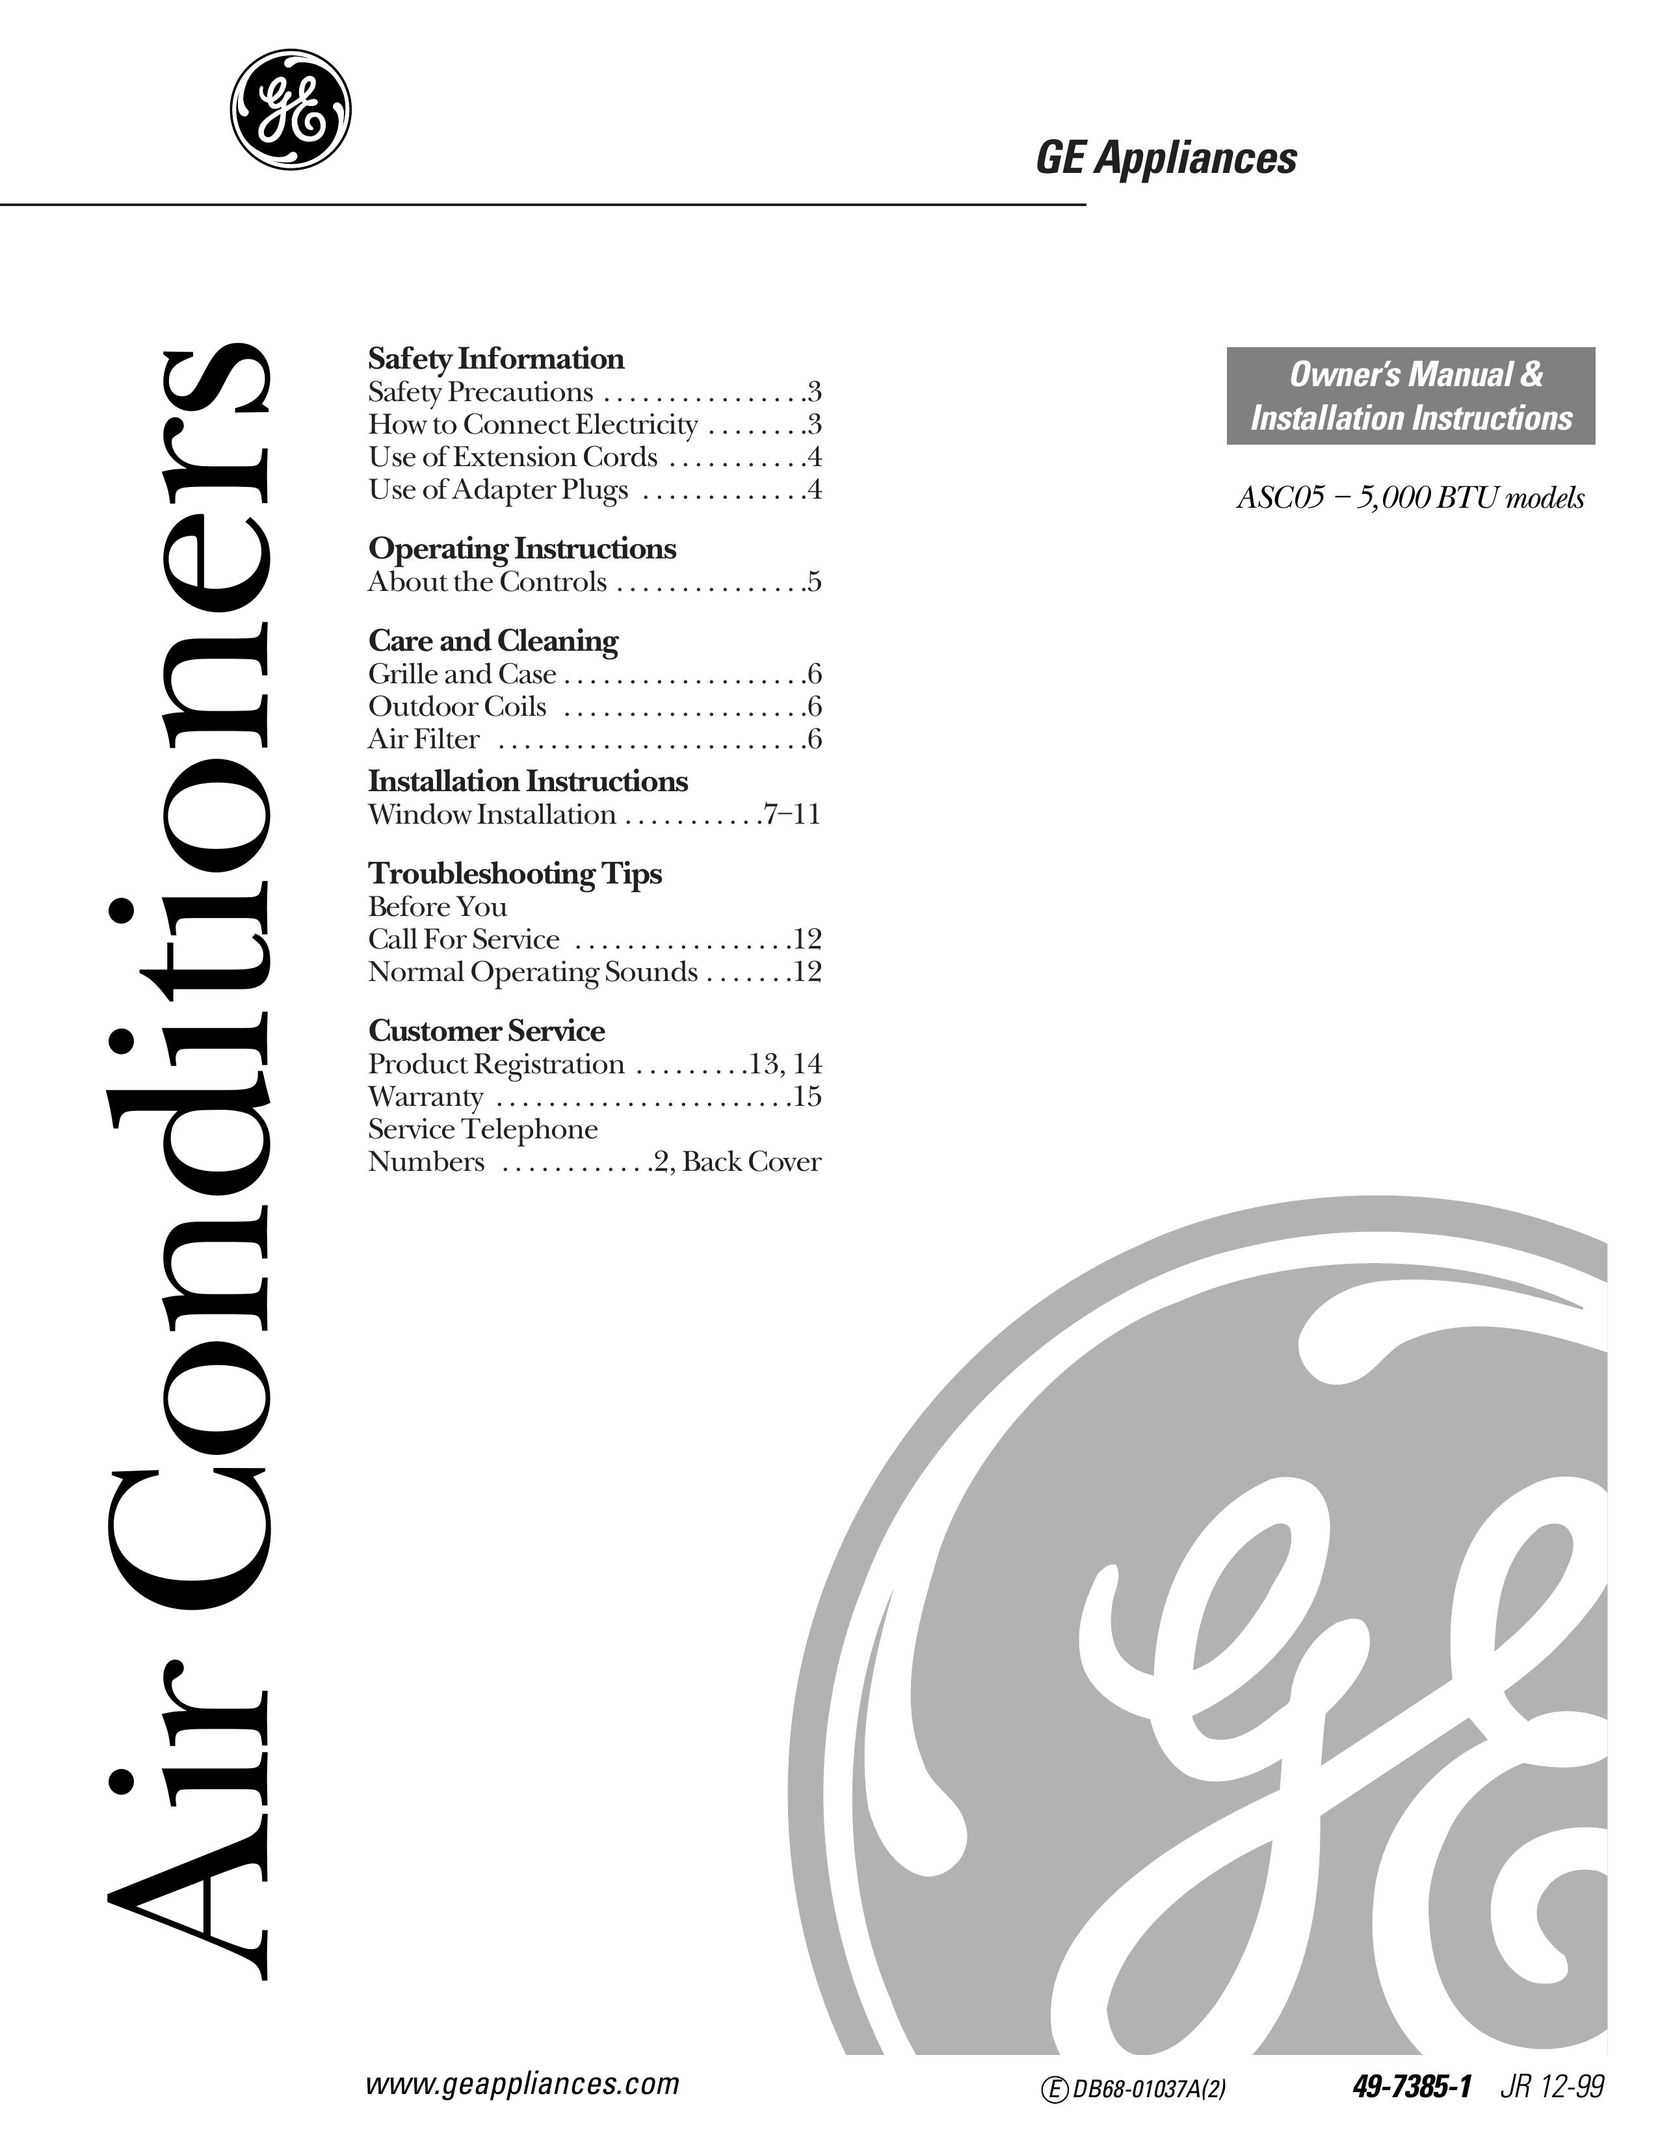 LG Electronics ASC05 Air Conditioner User Manual